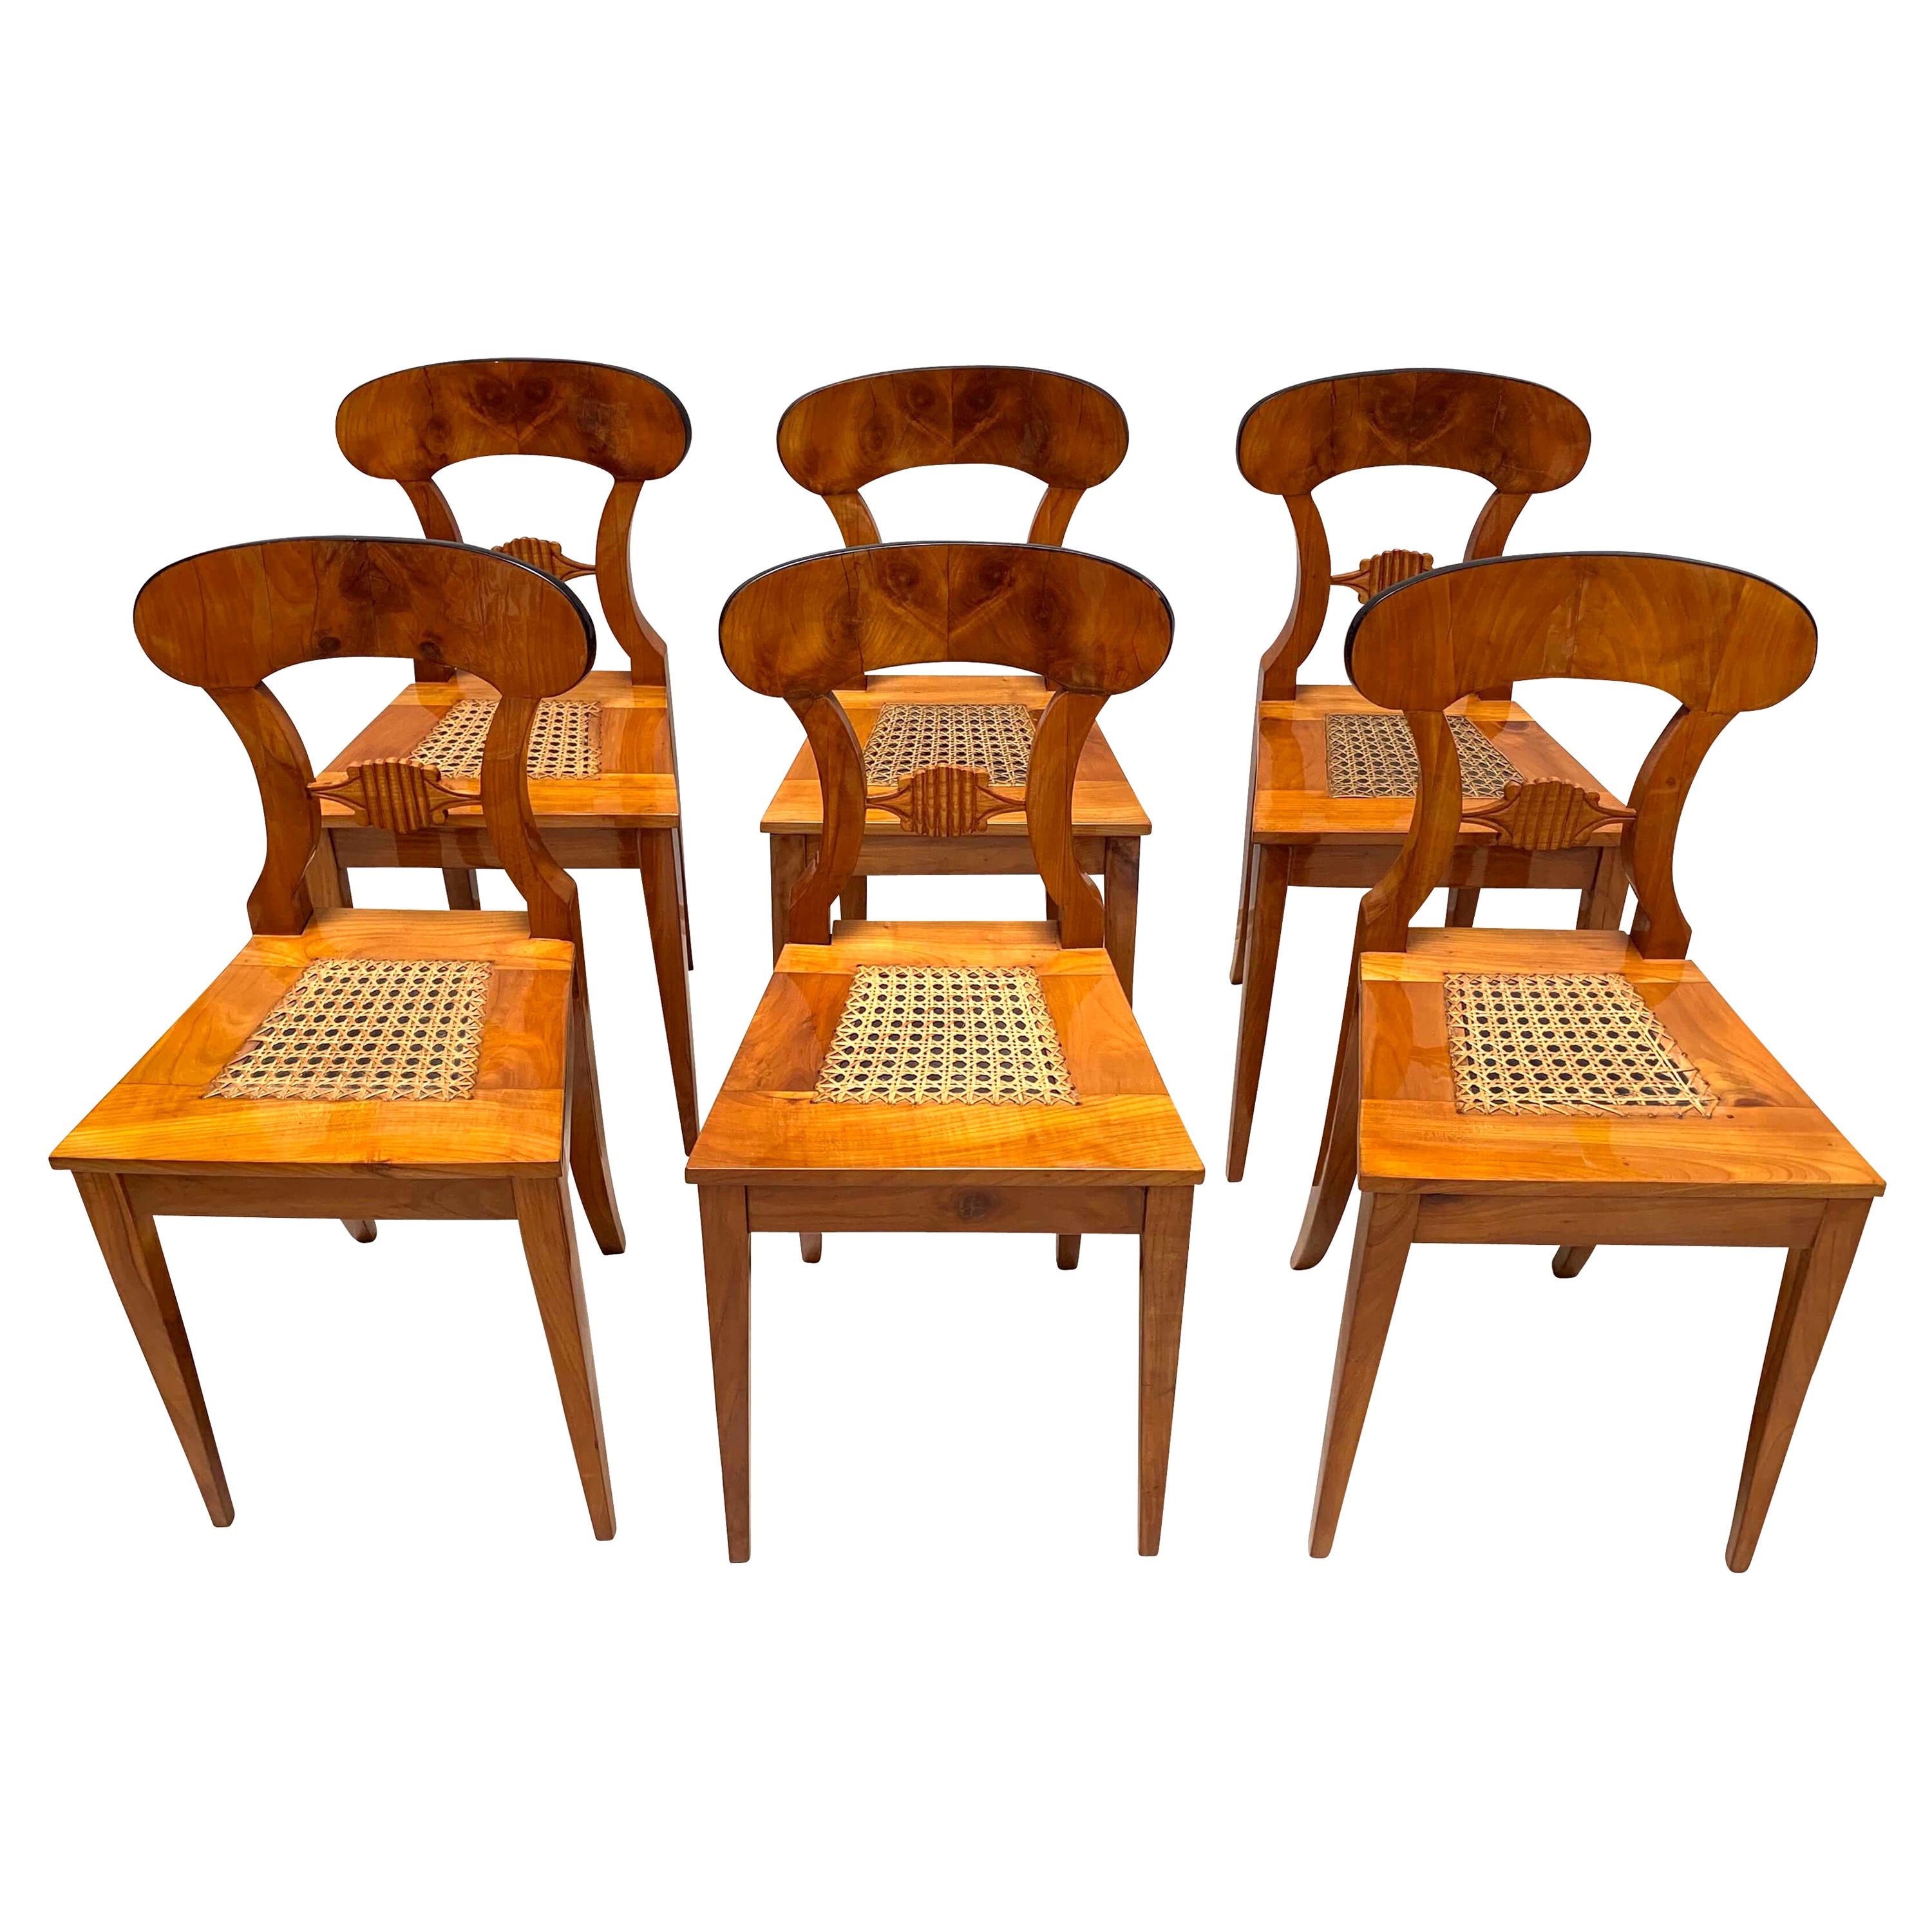 Beautiful Set of six Biedermeier board chairs from Vienna, Austria, circa 1830.

Wonderful bright cherry veneer (shovel) and solid wood (frame and legs). 
Book-matched cherry veneer on the shovels. 
Long and slightly curved, conical square-tapered